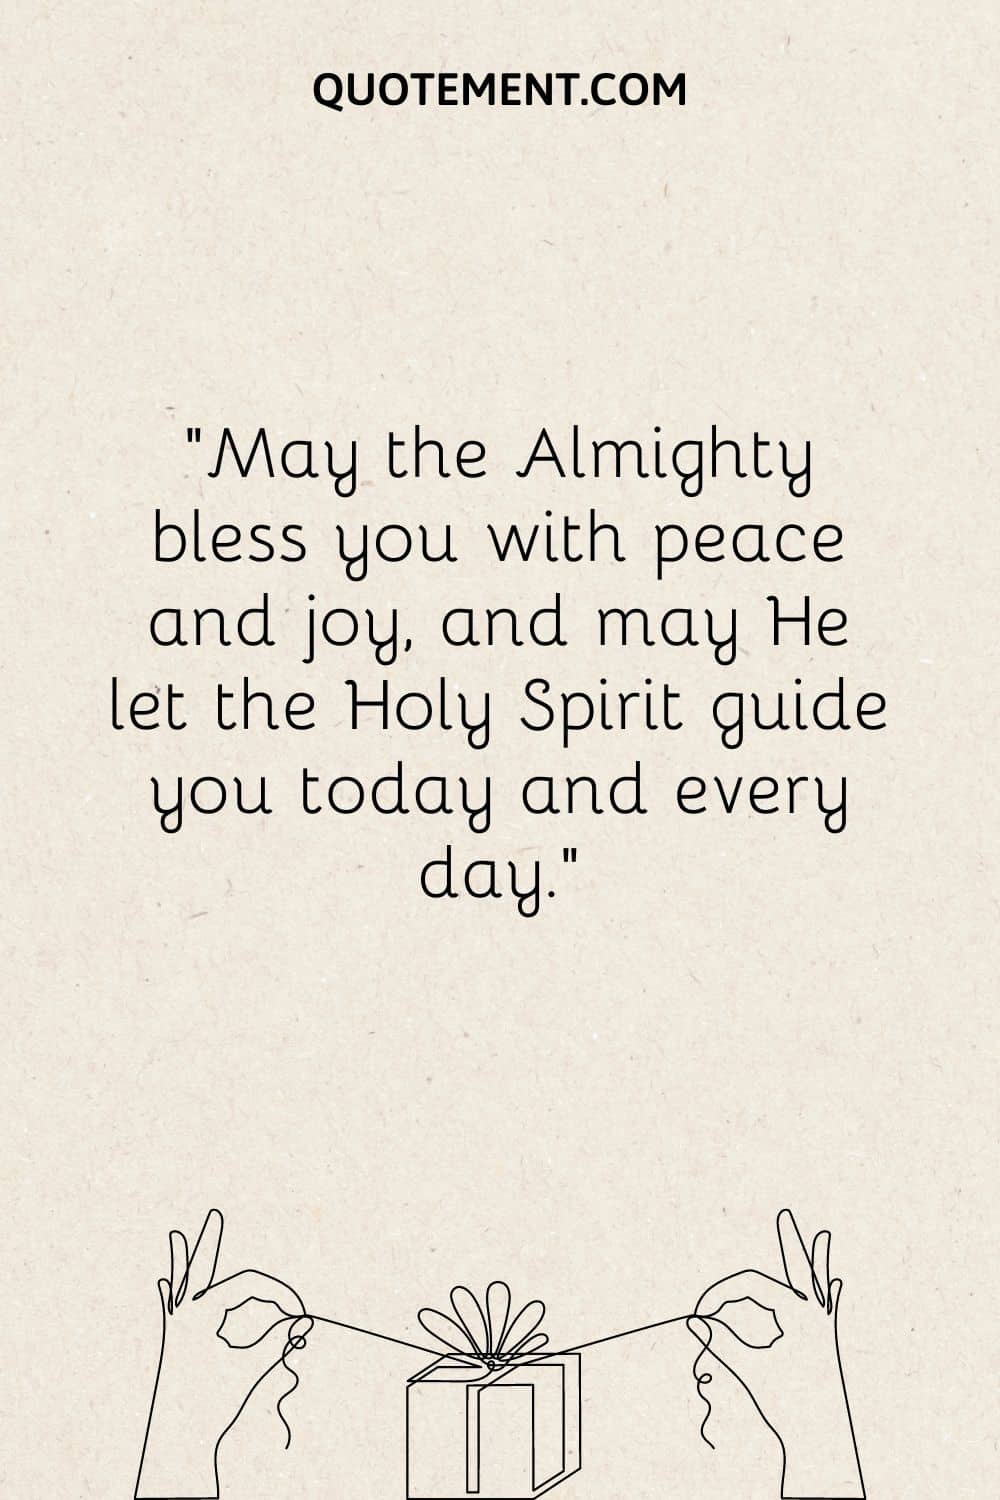 May the Almighty bless you with peace and joy, and may He let the Holy Spirit guide you today and every day.